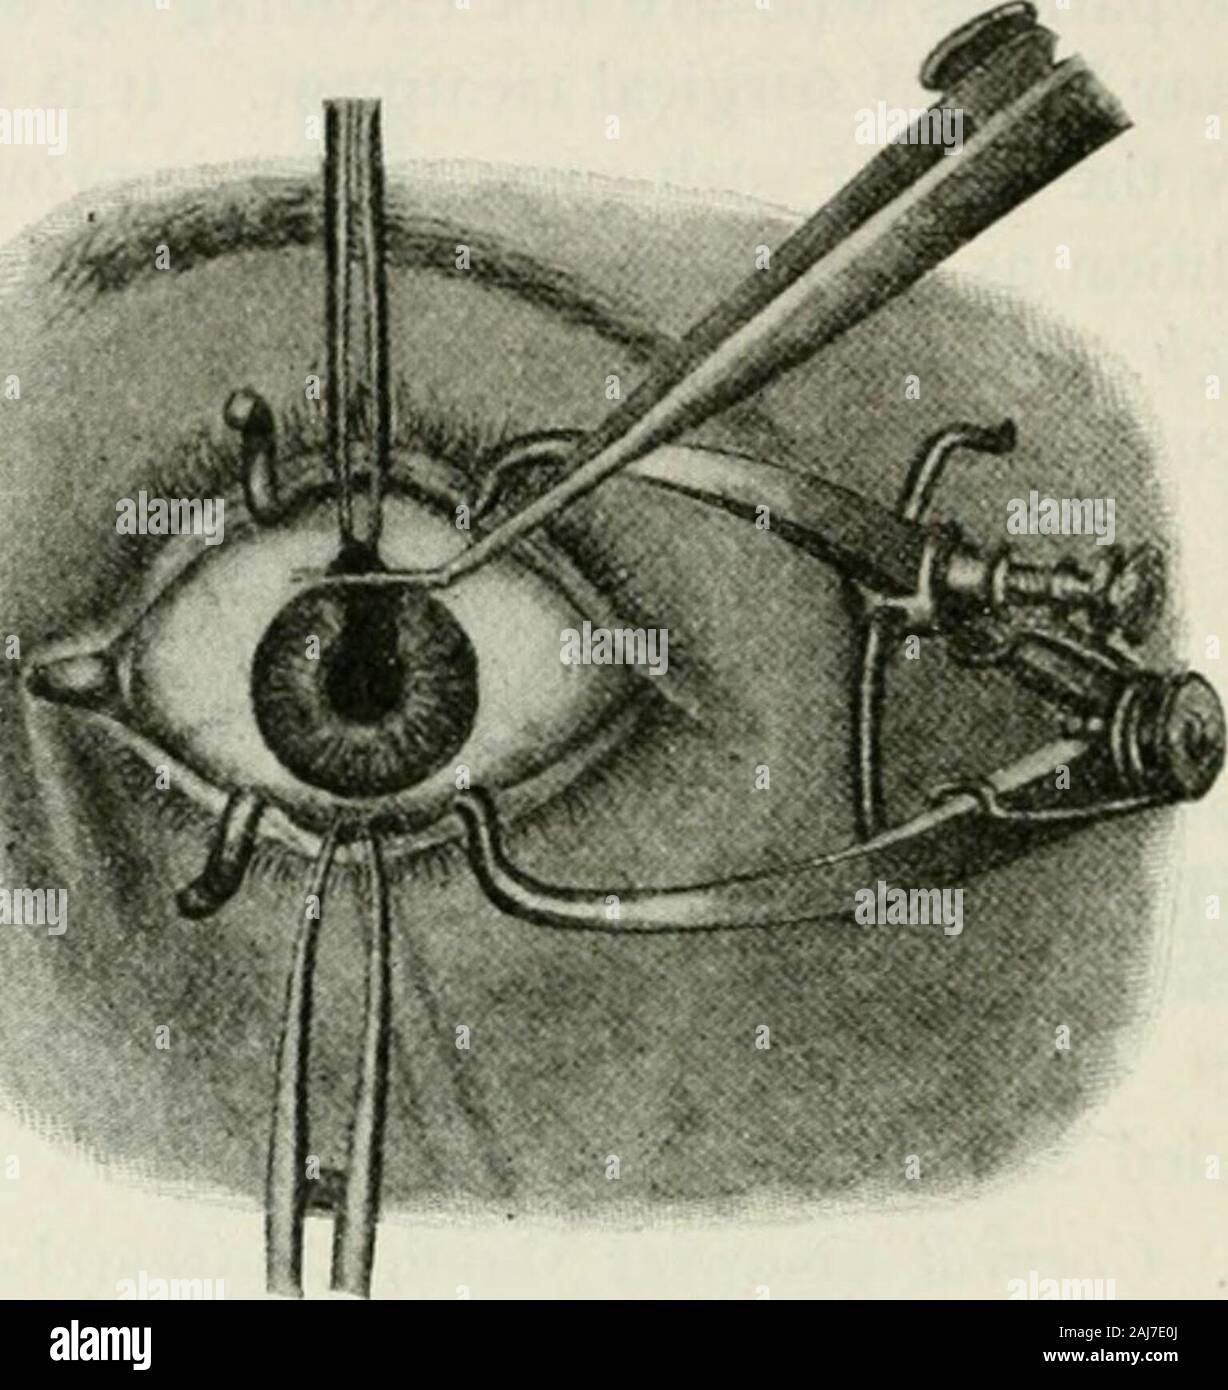 The commoner diseases of the eye : how to detect and how to treat them . s should first be treated and, if possible,cured. If this is neglected, the abundant germswhich these diseases supply are very likely toinfect the corneal wound and lead to muchdreaded complications. 4.. Corneal opacities should be searched for,and if found, the patient should be warned thatthey form a bar to realization of perfect vision. 5. It is very important, in view of their ulti-mate effect upon the eyesight, that the presenceor absence of deep-seated disease of the eyeshould be demonstrated. It would be very, dis- Stock Photo